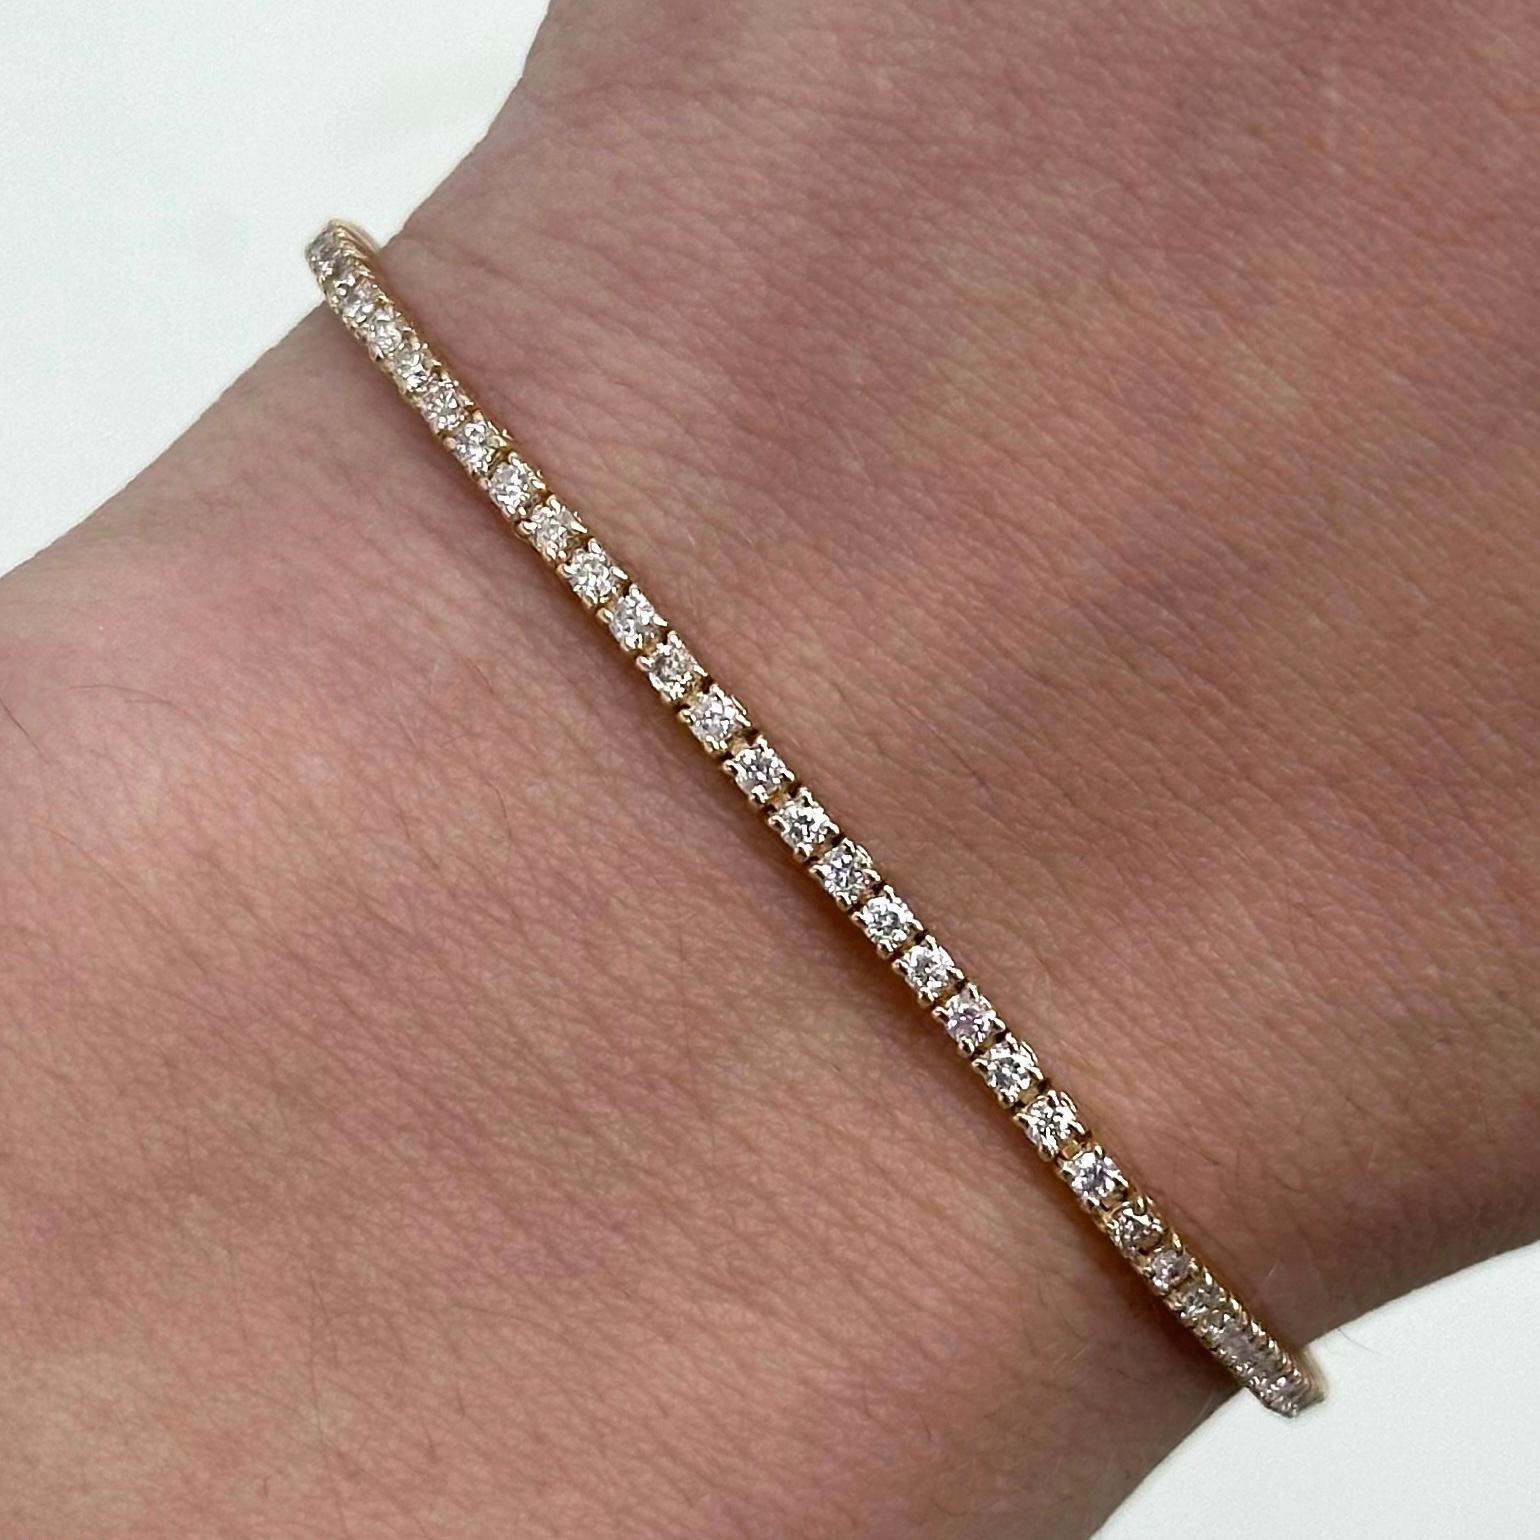 Exquisite and timeless diamonds tennis bracelet, by Alexander Beverly Hills.
90 round brilliant diamonds, 1.35 carats total. Approximately G/H color and SI clarity. Four prong set in 14k rose gold, 5.32 grams, 7 inches. 
Accommodated with an